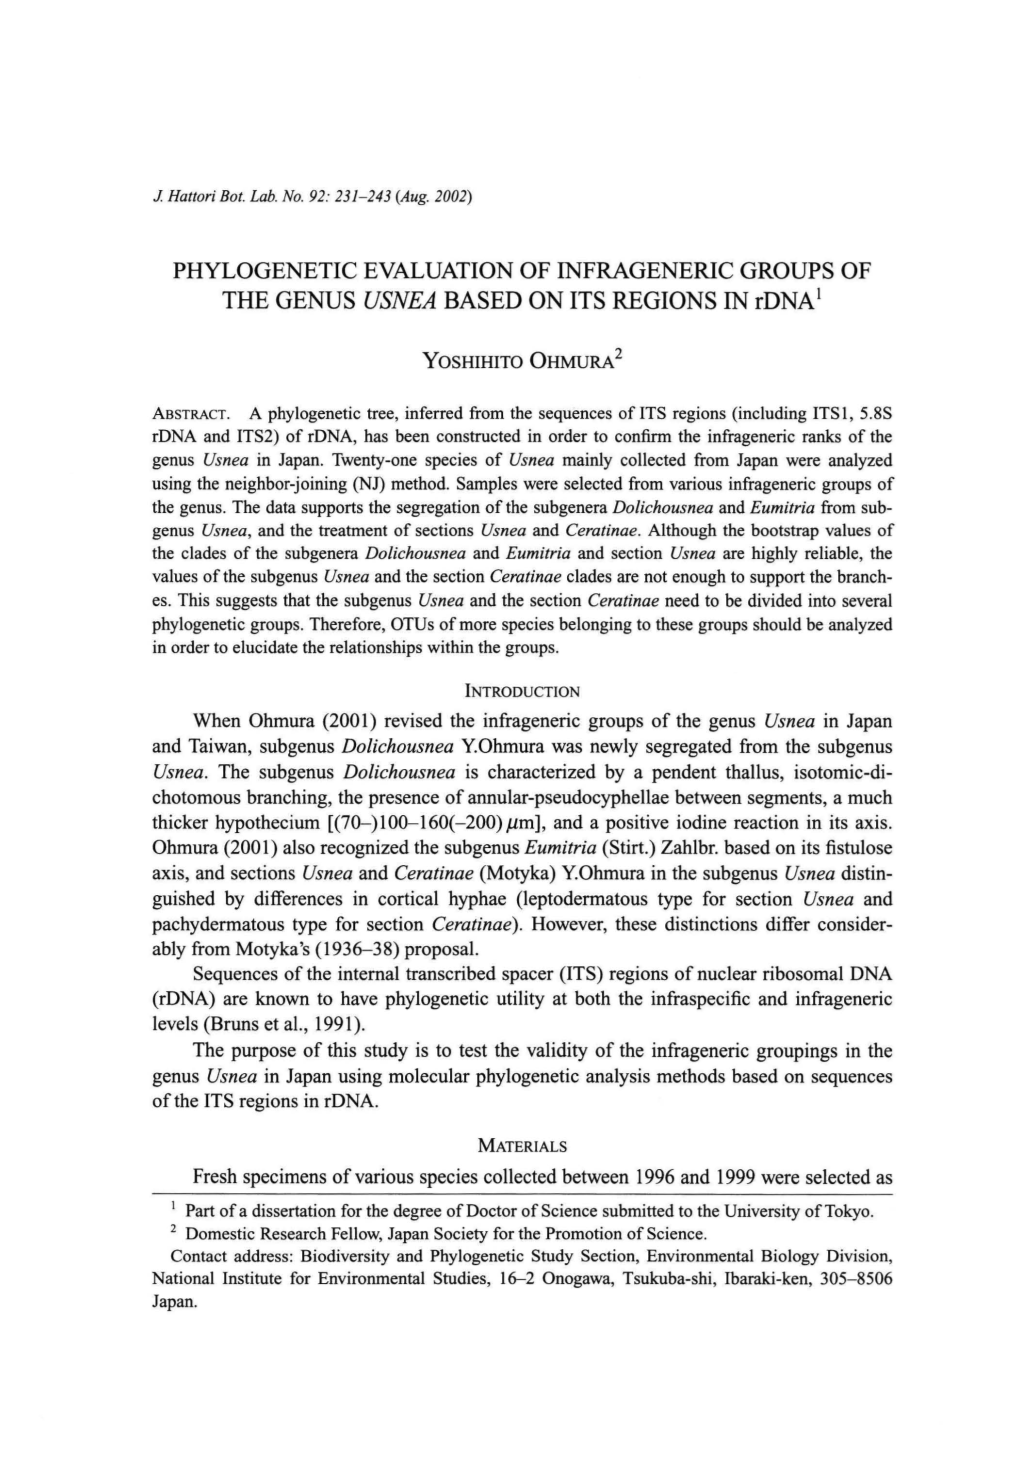 PHYLOGENETIC EVALUATION of INFRAGENERIC GROUPS of the GENUS USNEA BASED on ITS REGIONS in Rdna I